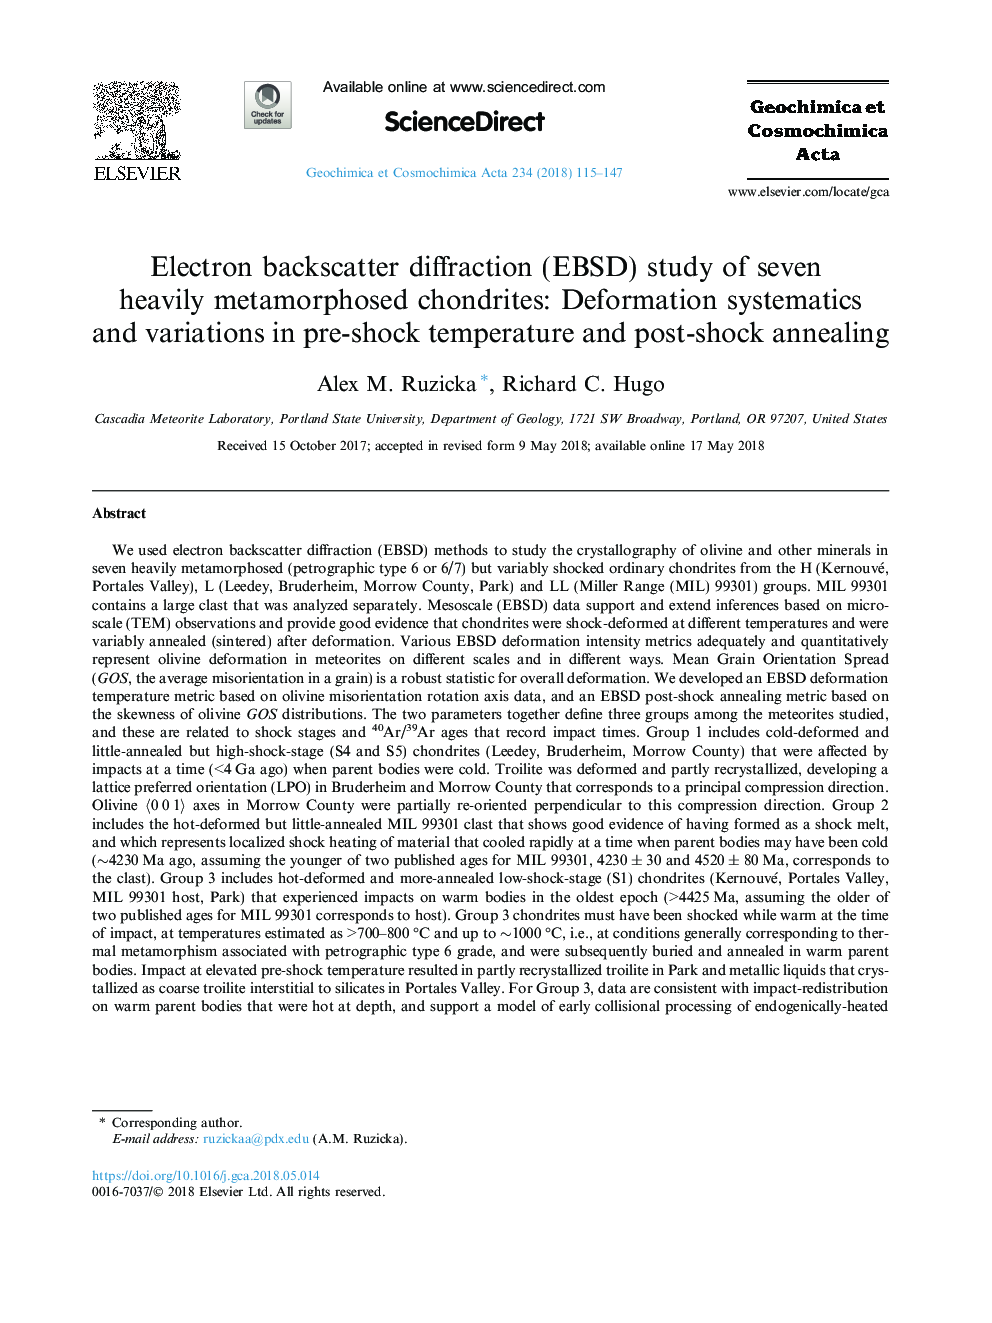 Electron backscatter diffraction (EBSD) study of seven heavily metamorphosed chondrites: Deformation systematics and variations in pre-shock temperature and post-shock annealing